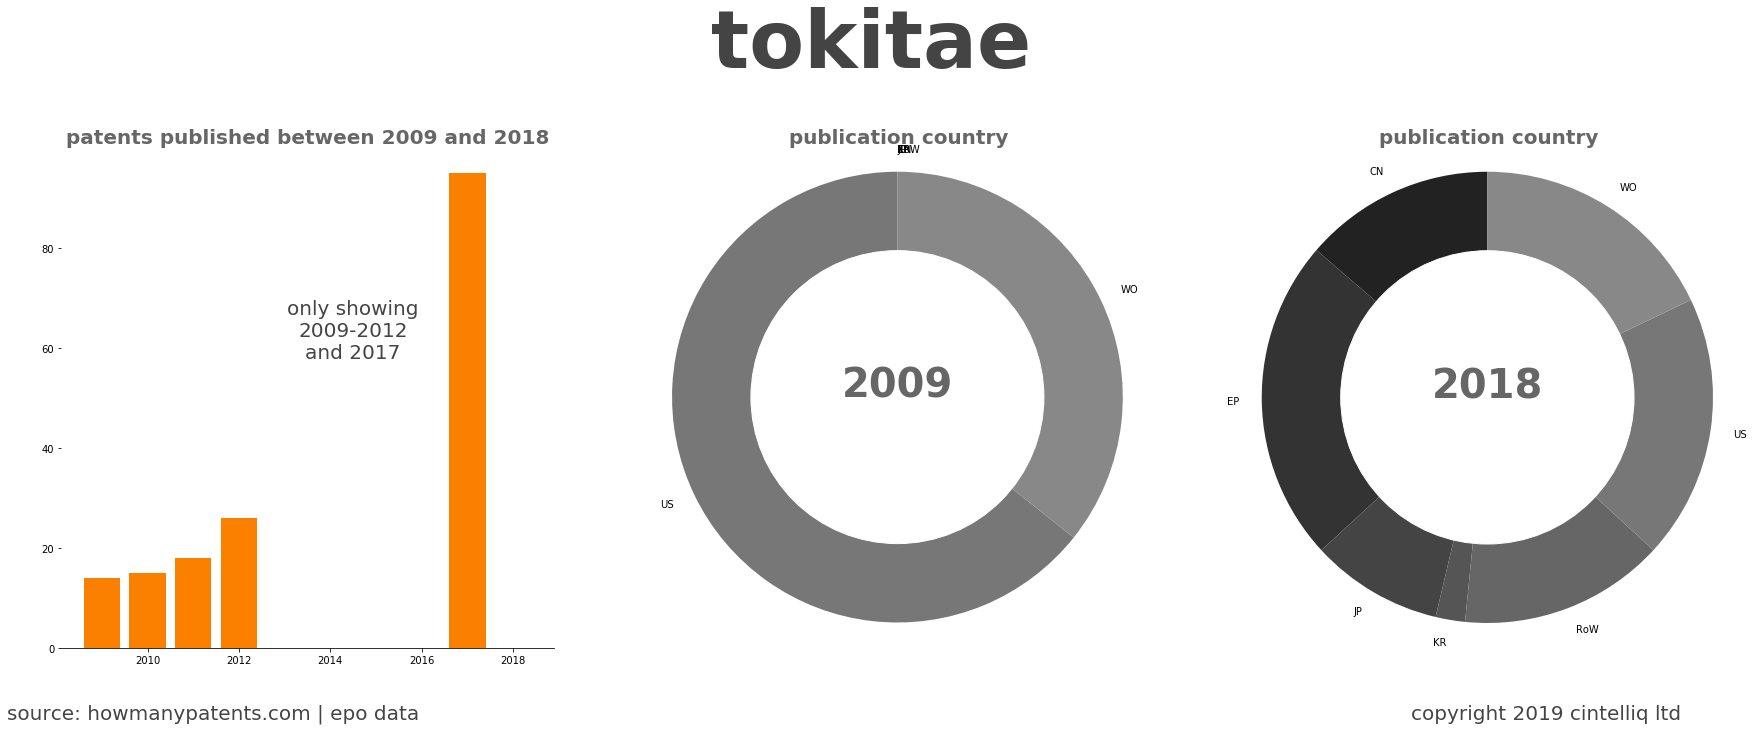 summary of patents for Tokitae